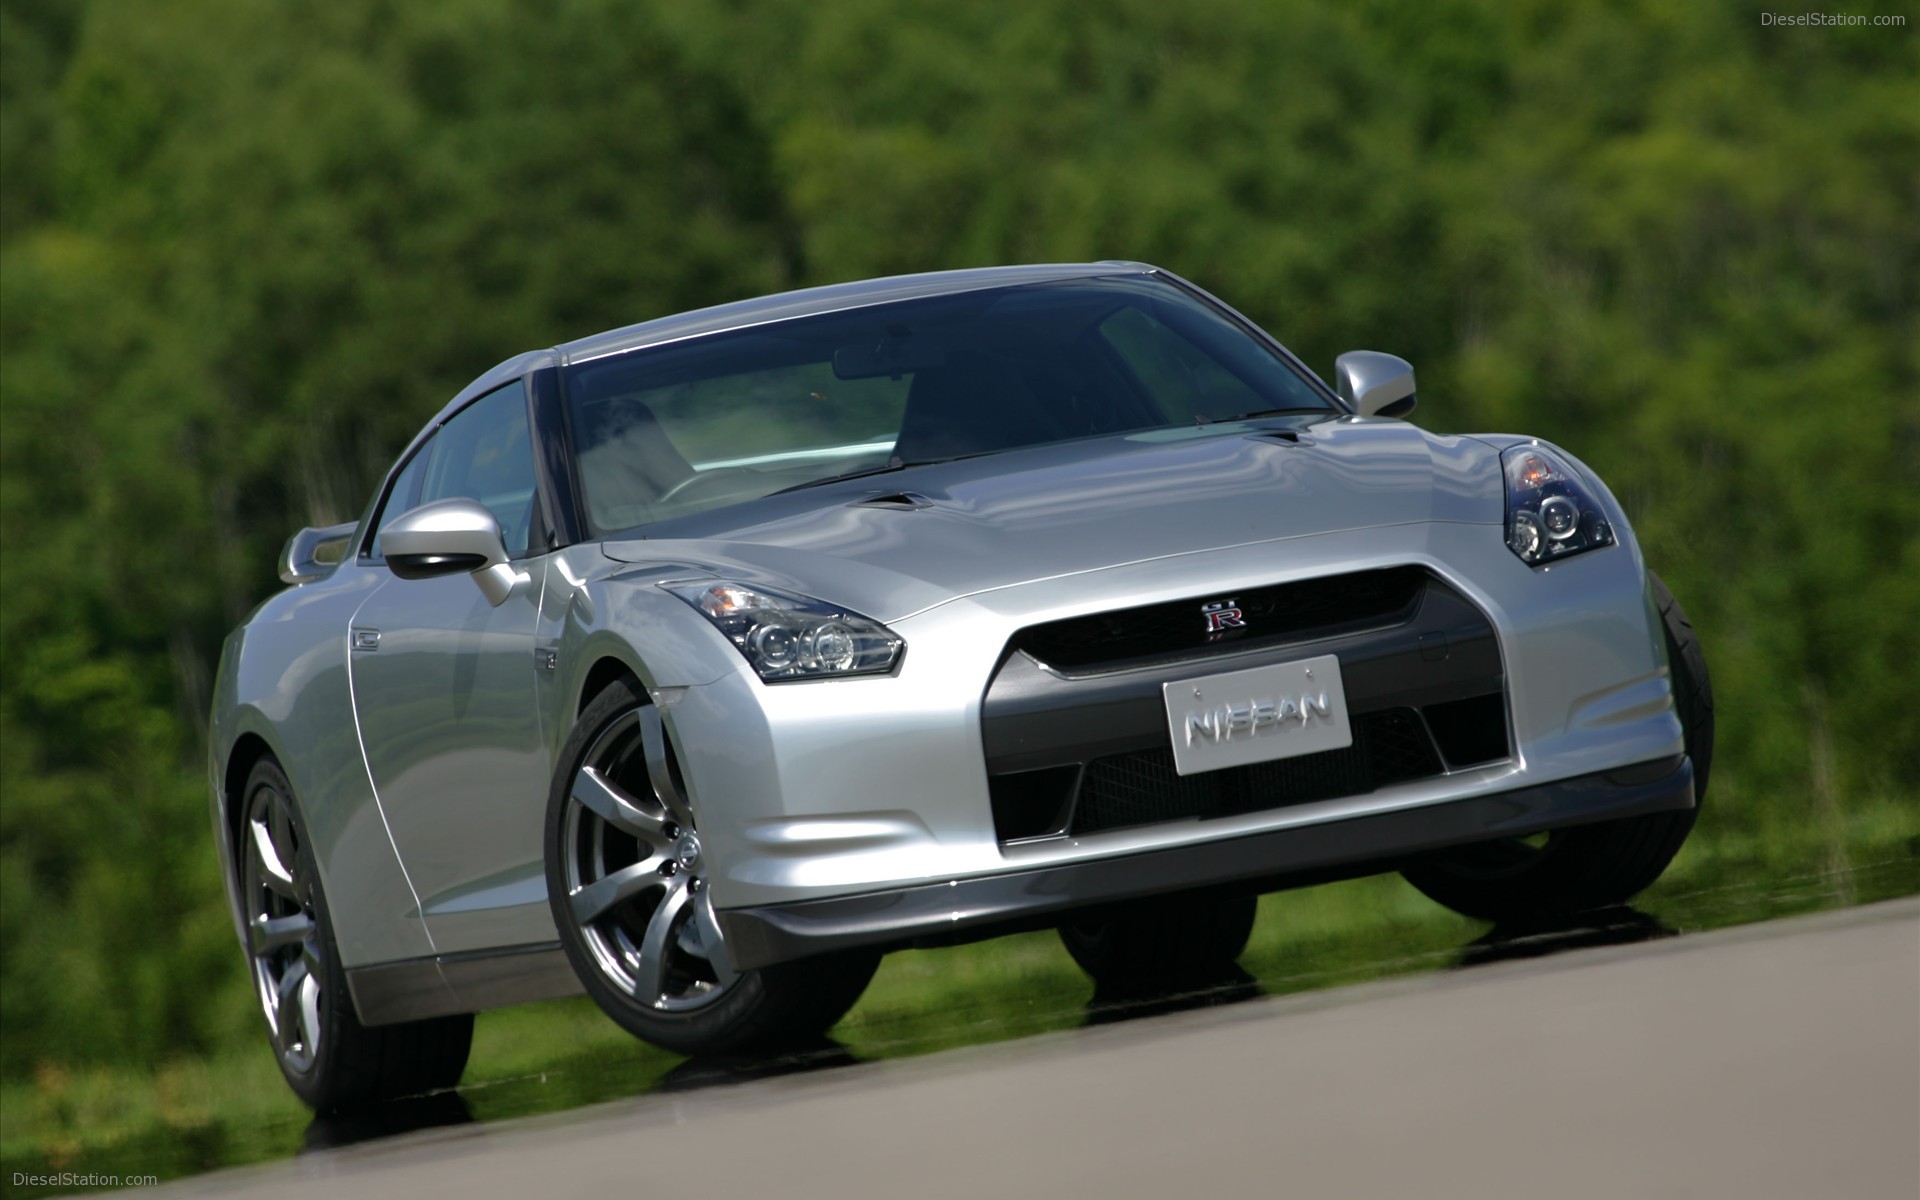 Nissan Gt R Widescreen Exotic Car Photo Of